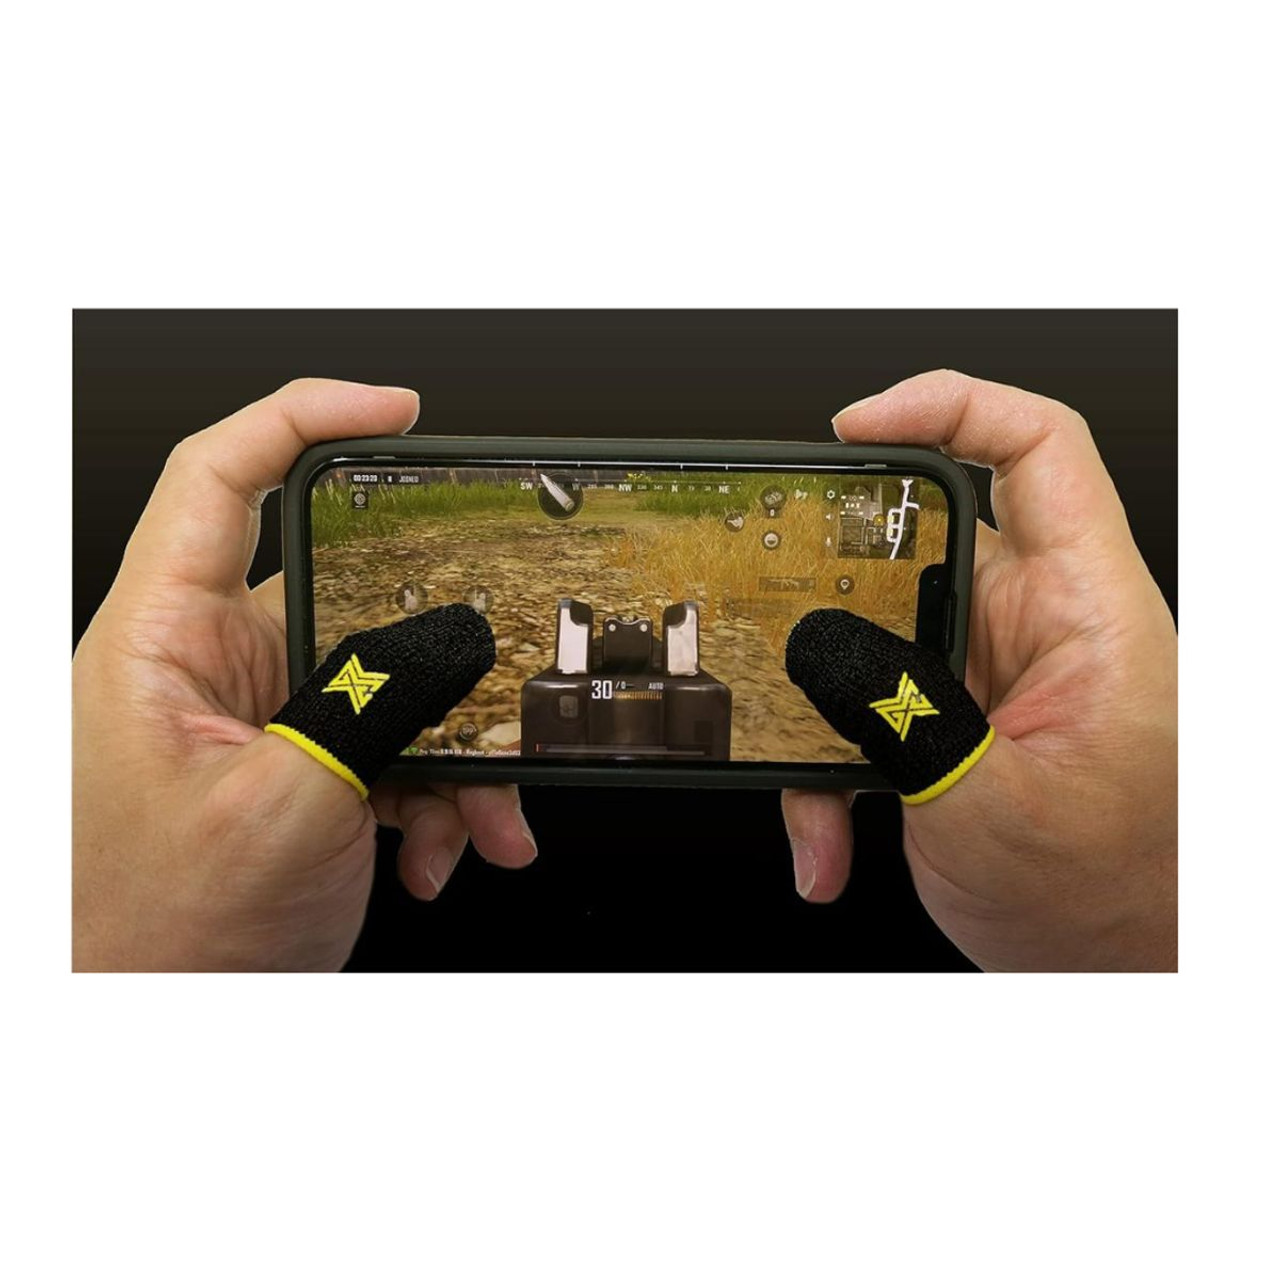 Mobile Gaming Corps ClawSocks Phone Gaming Finger Sleeves (6-Pack) product image